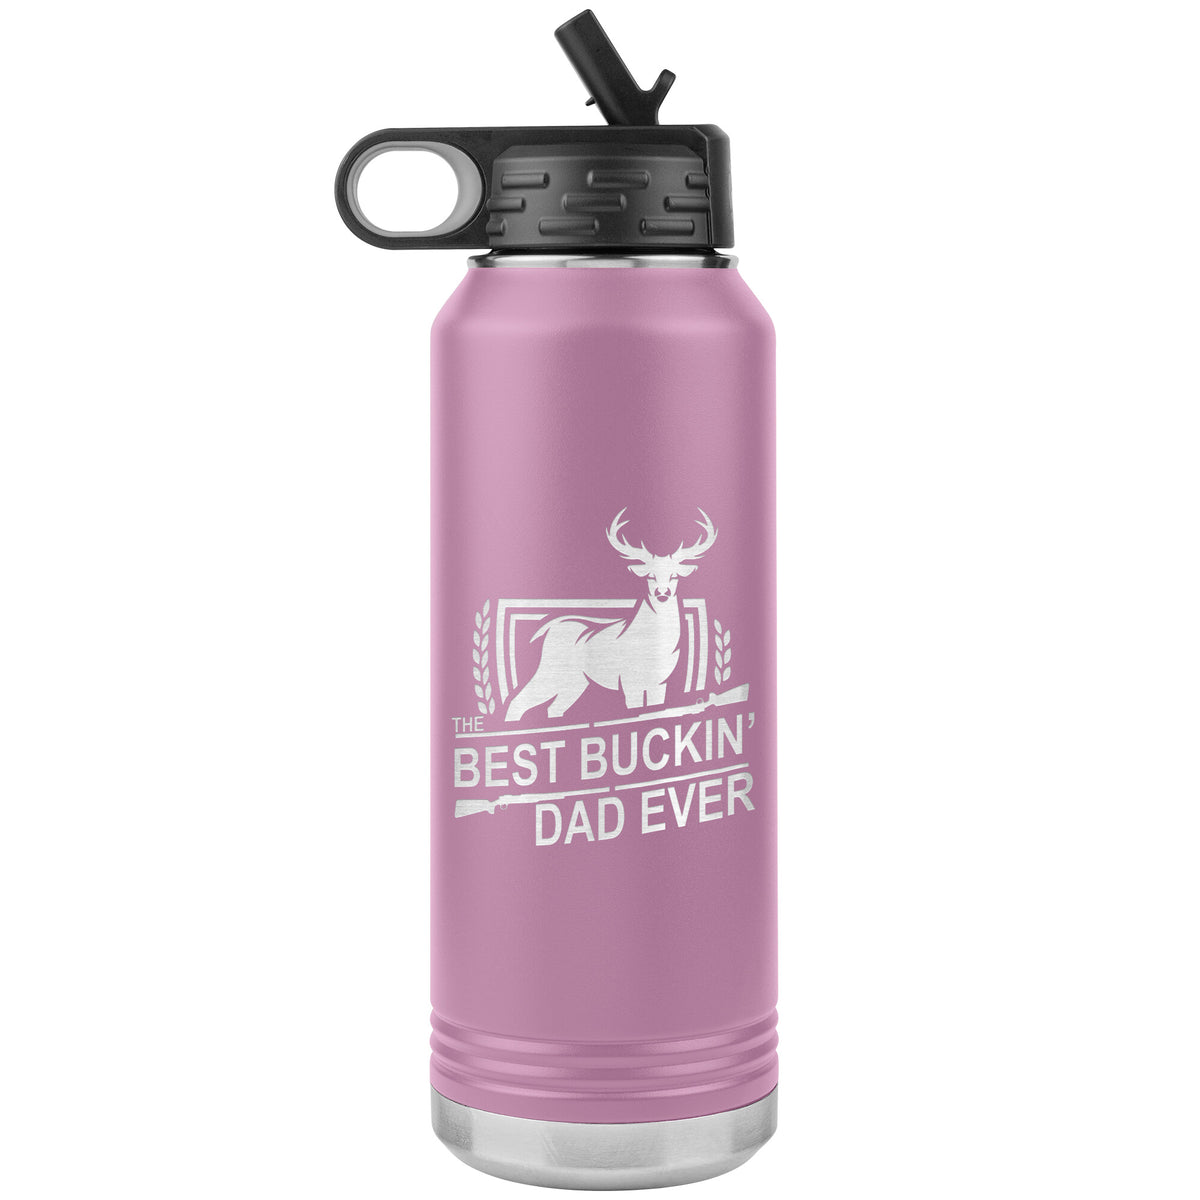 The Best Buckin' Dad Ever - 32oz Insulated ater Bottle - Free Shipping